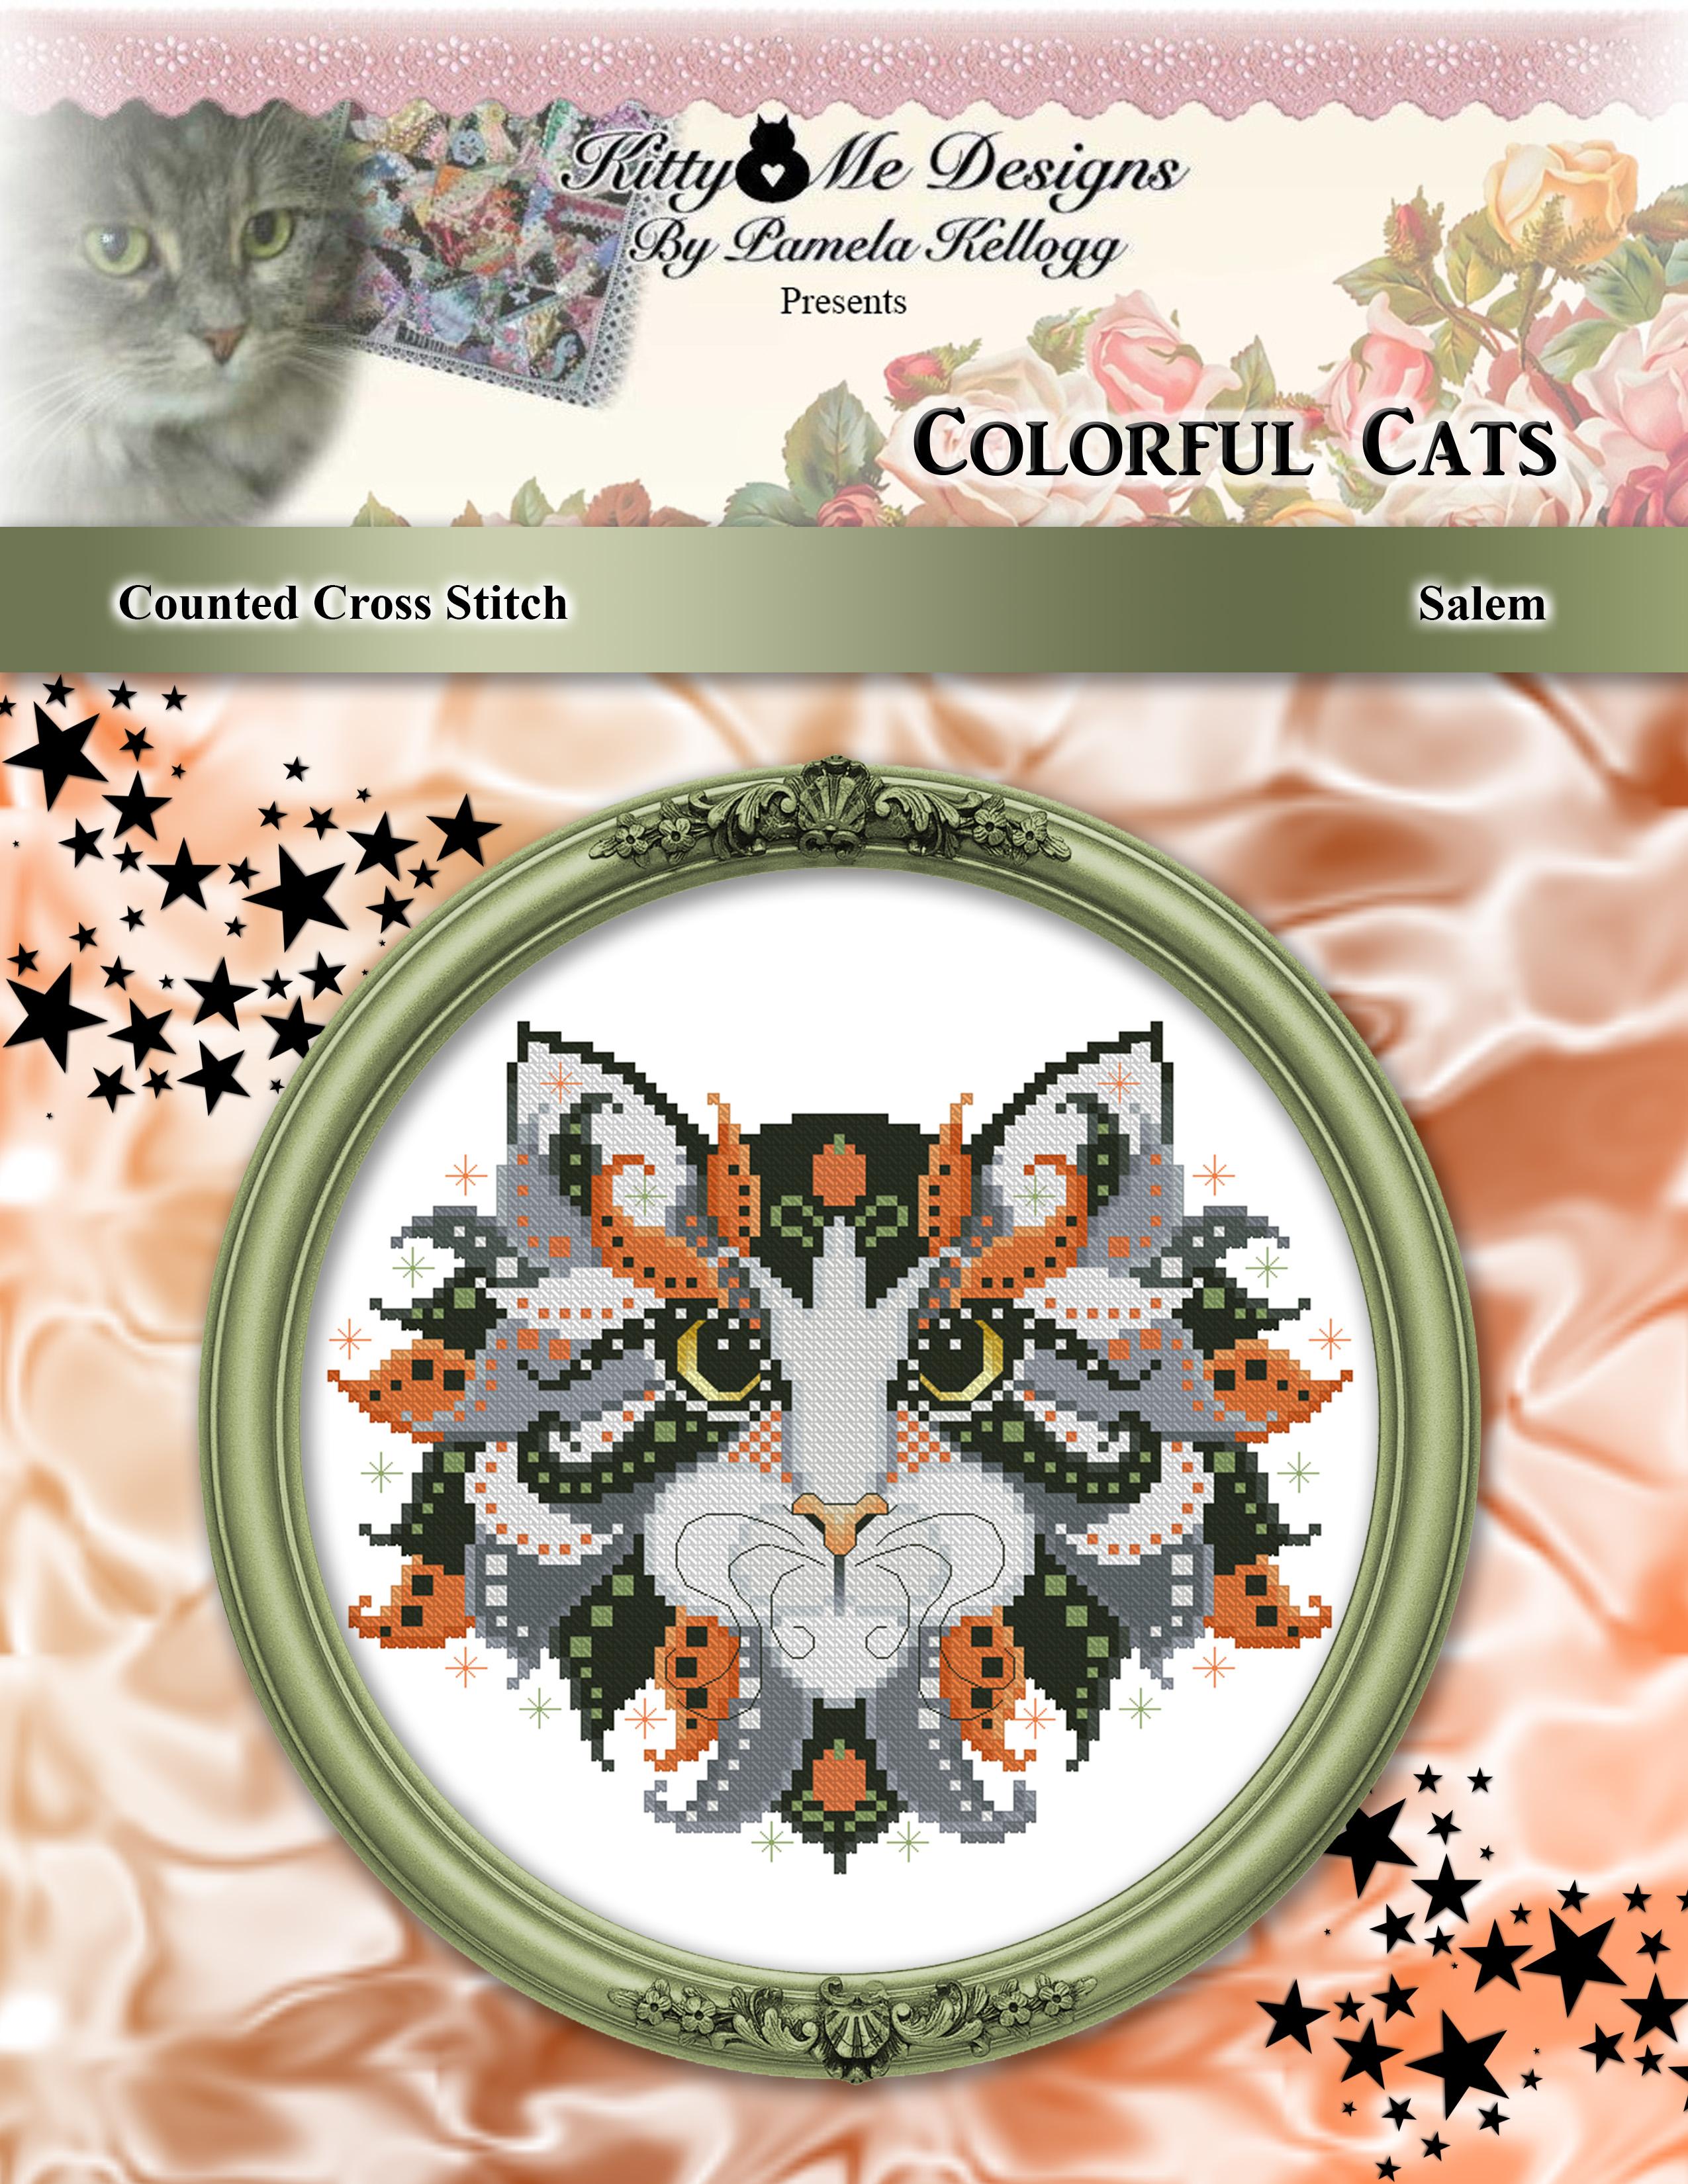 Colorful Cats: Salem by Kitty and Me Designs